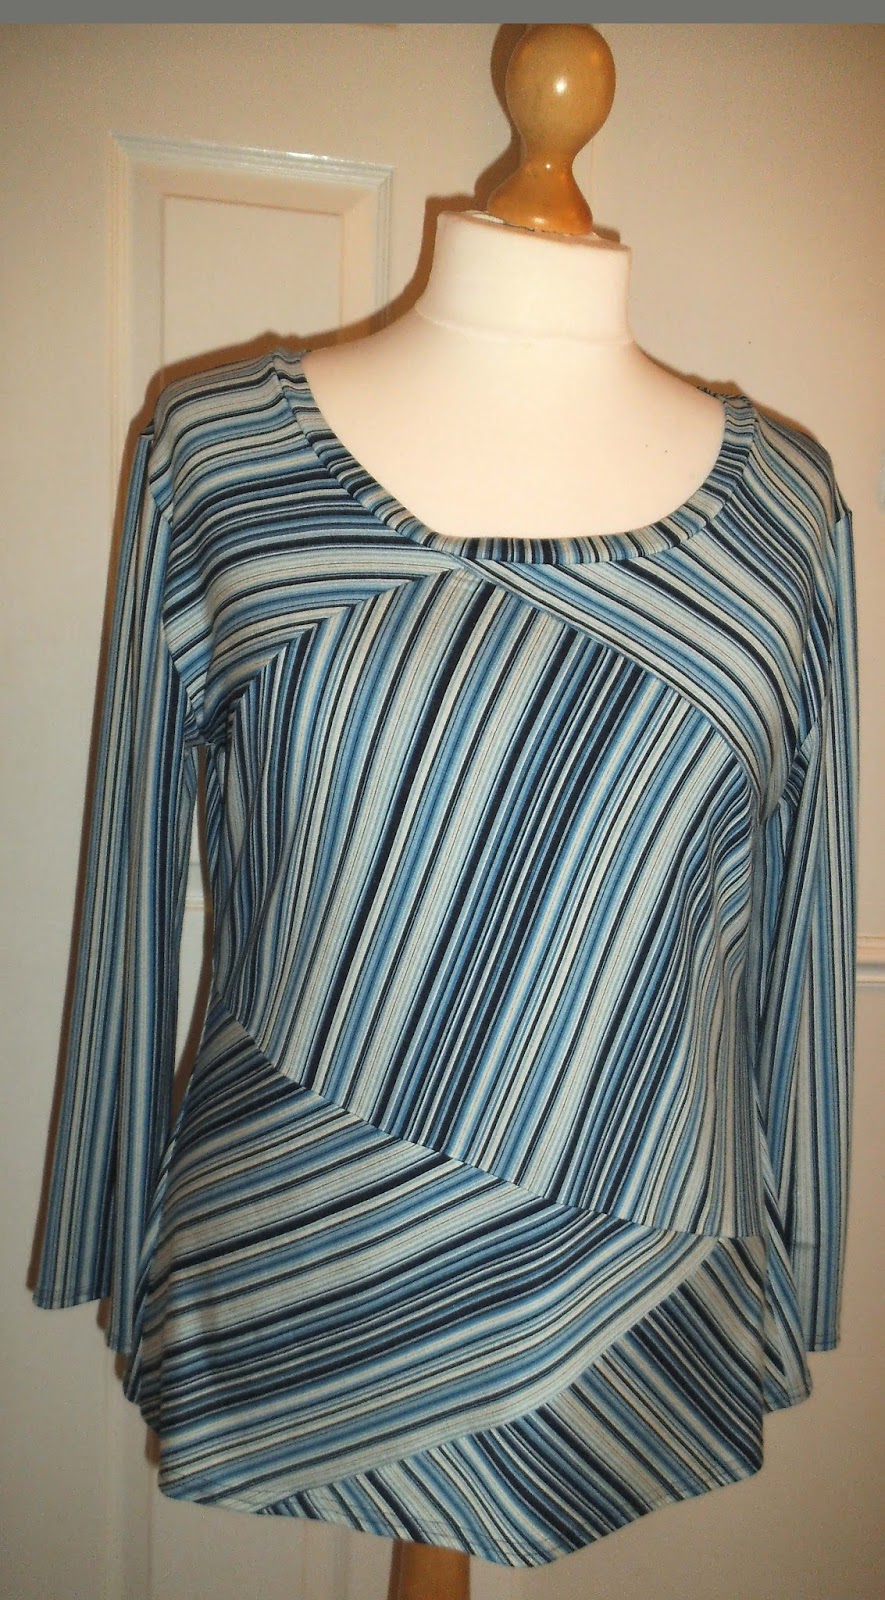 Sew Ruthie Style: Summer Sea (navy and cadet blue): Barcode Striped Tee